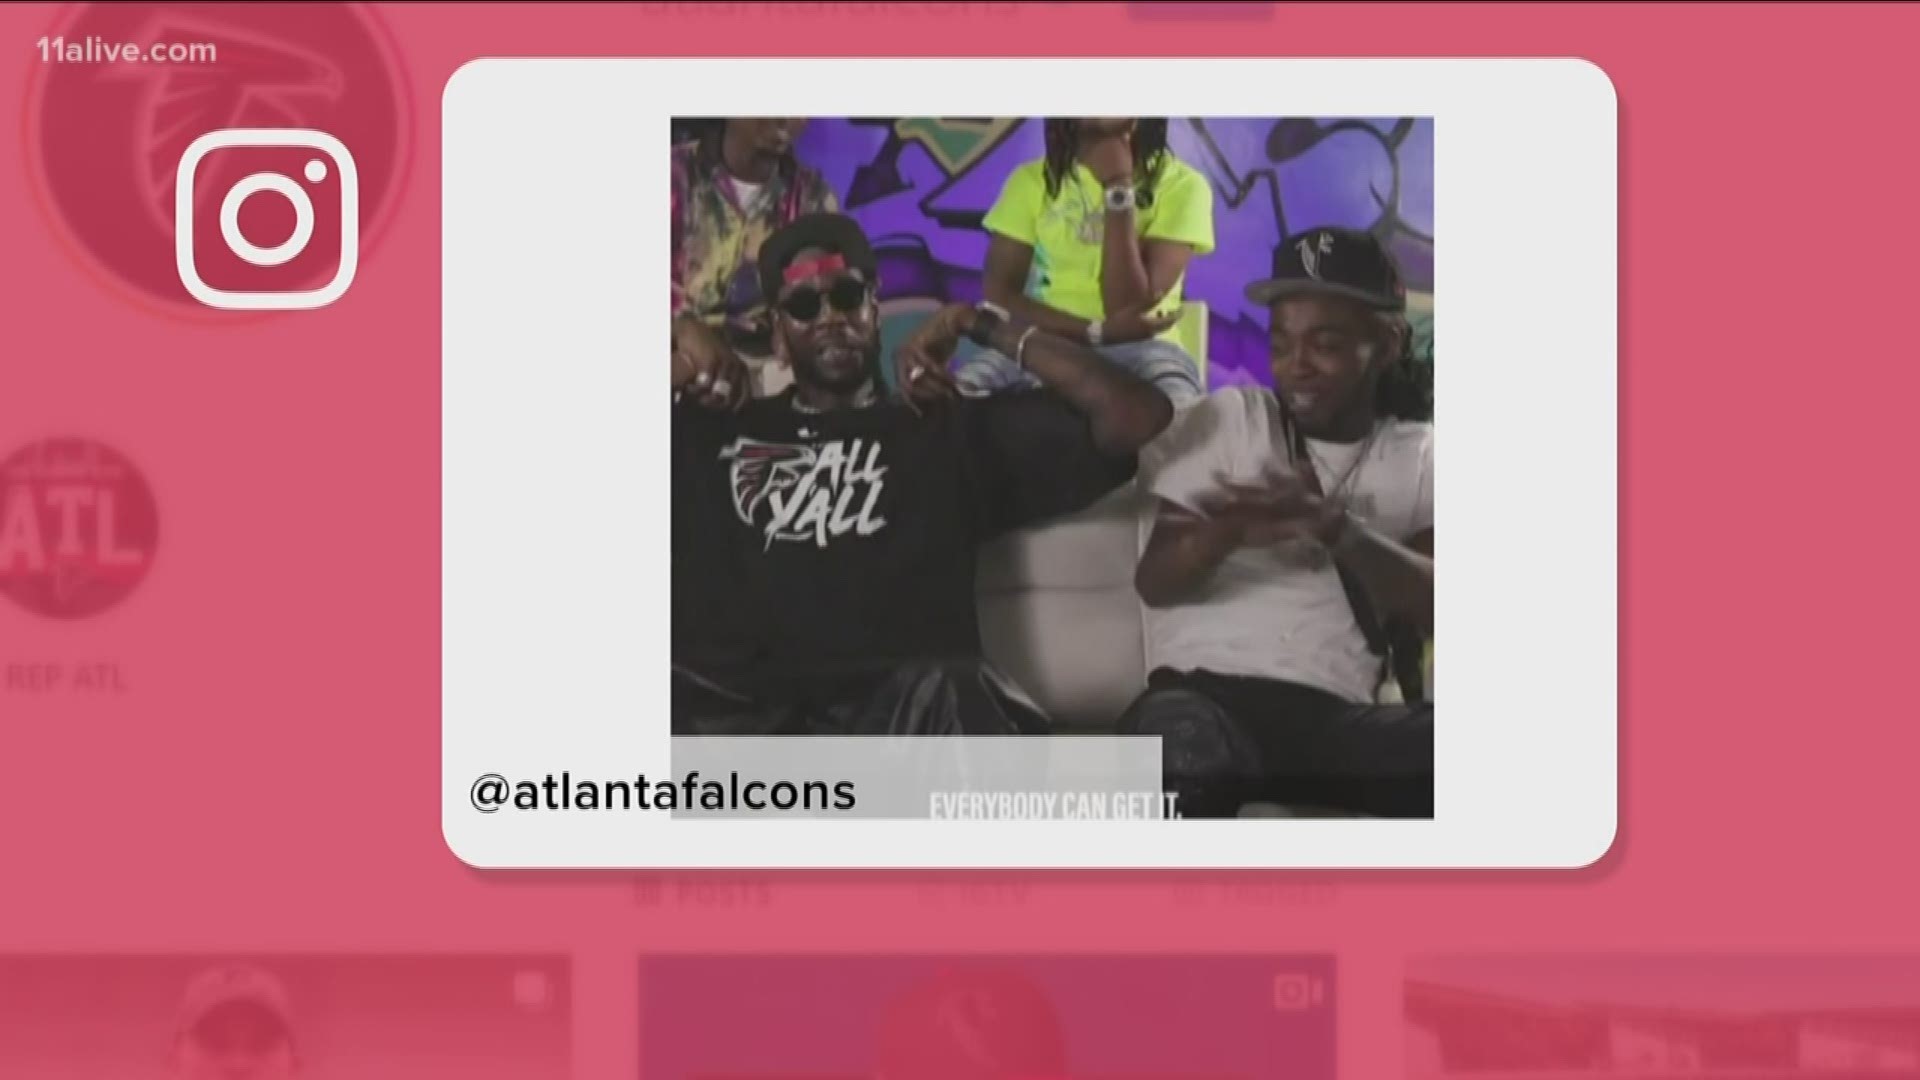 it's the new clothing collaboration between the Atlanta Falcons and Atlanta rapper 2Chainz